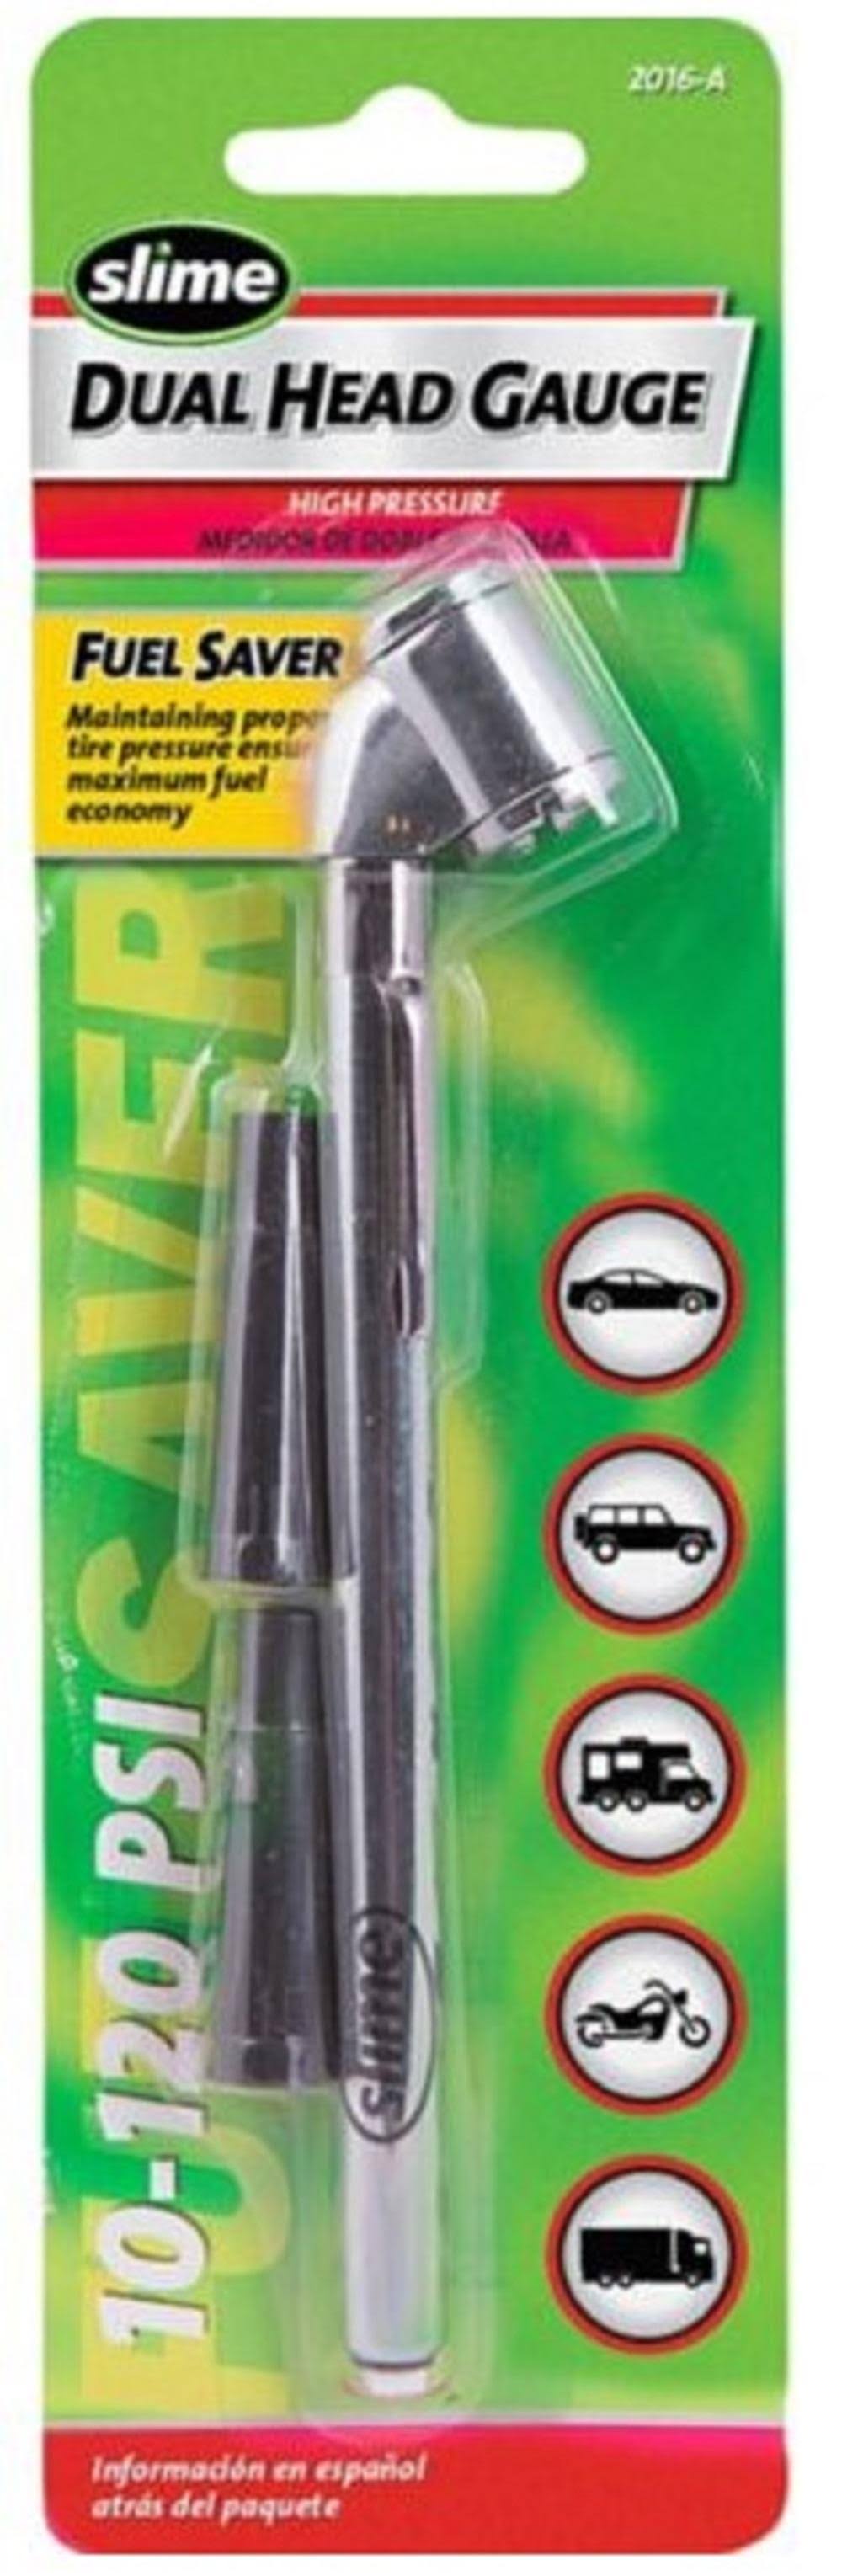 Slime 2016-A Dual Head Pencil Tire Gauge - 10 to 120 PSI with Bonus Valve Extensions